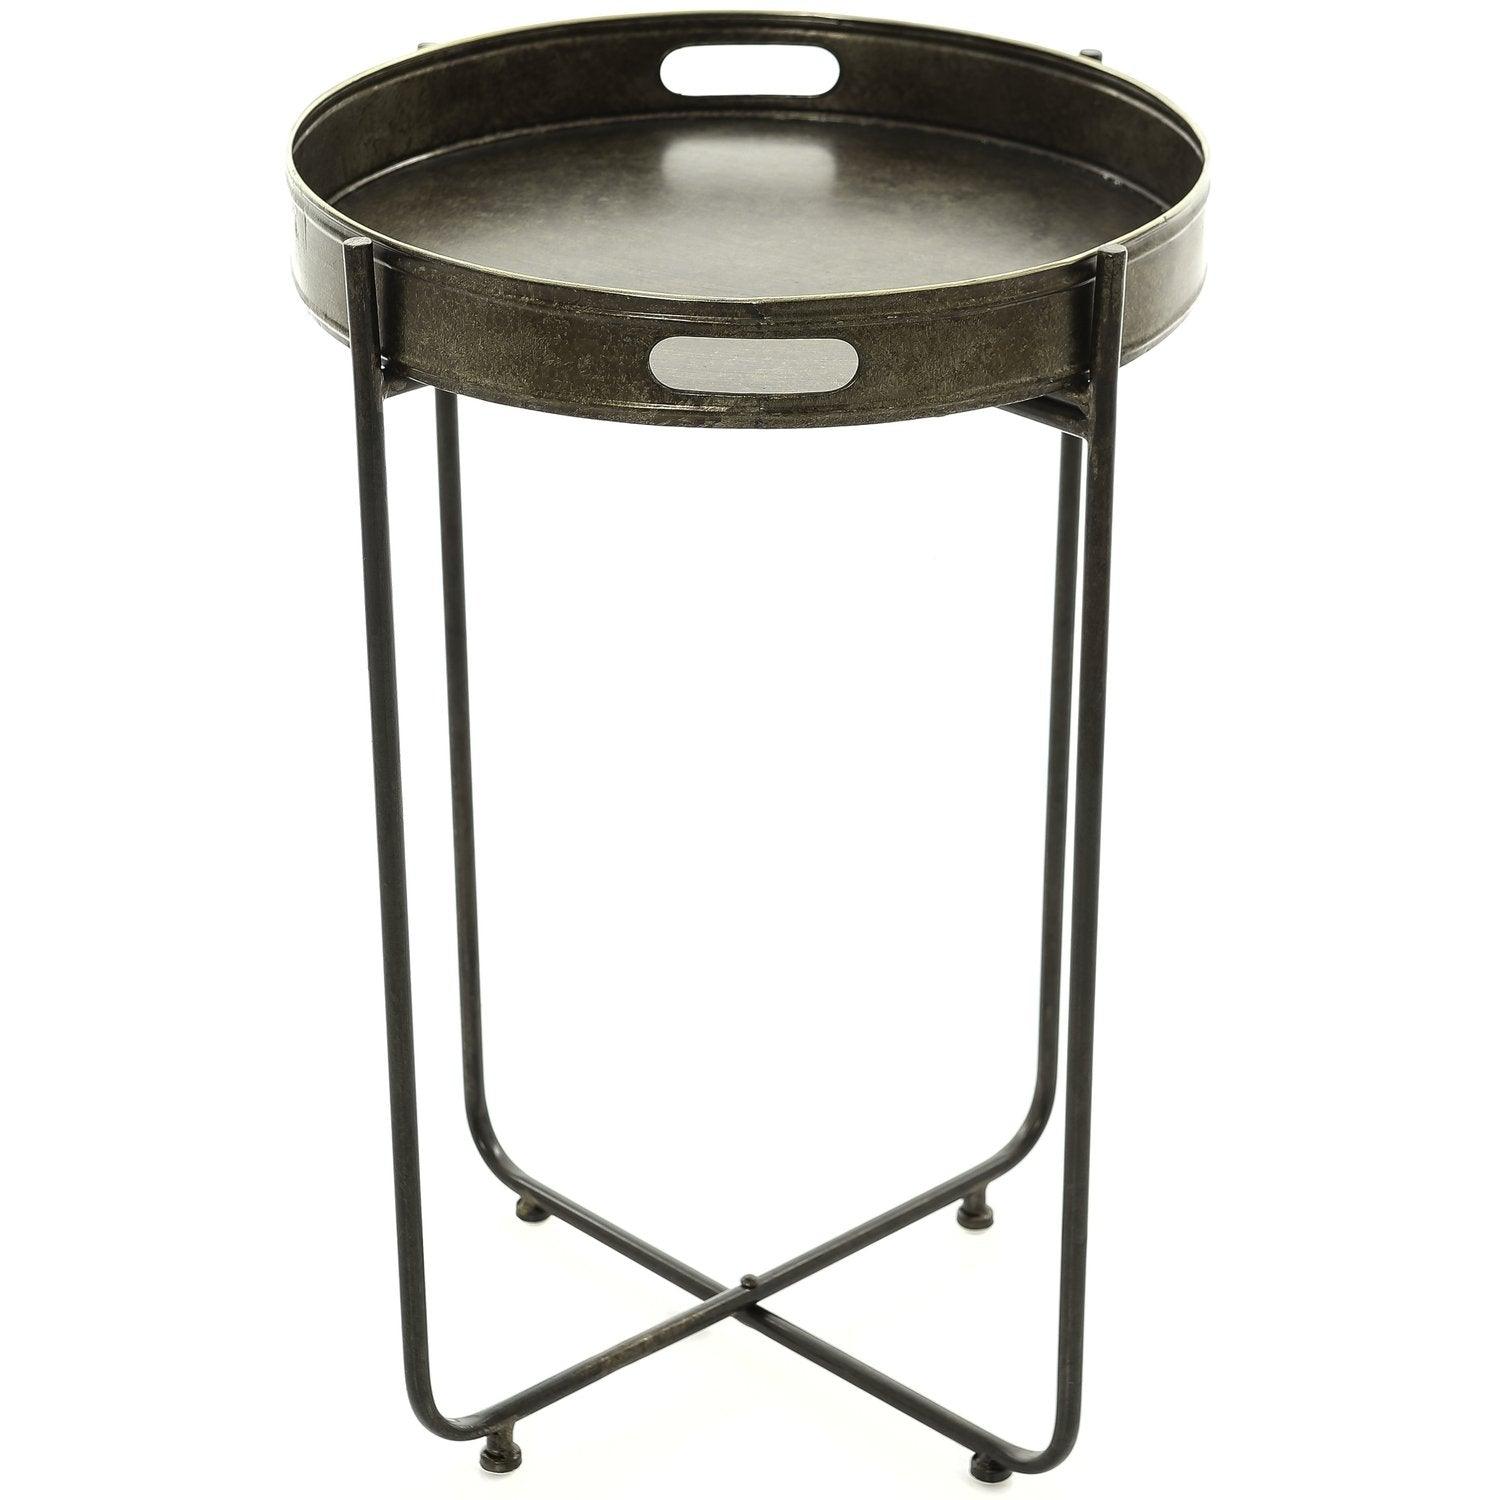 Tall Antique Bronze Tray With Stand - Vookoo Lifestyle